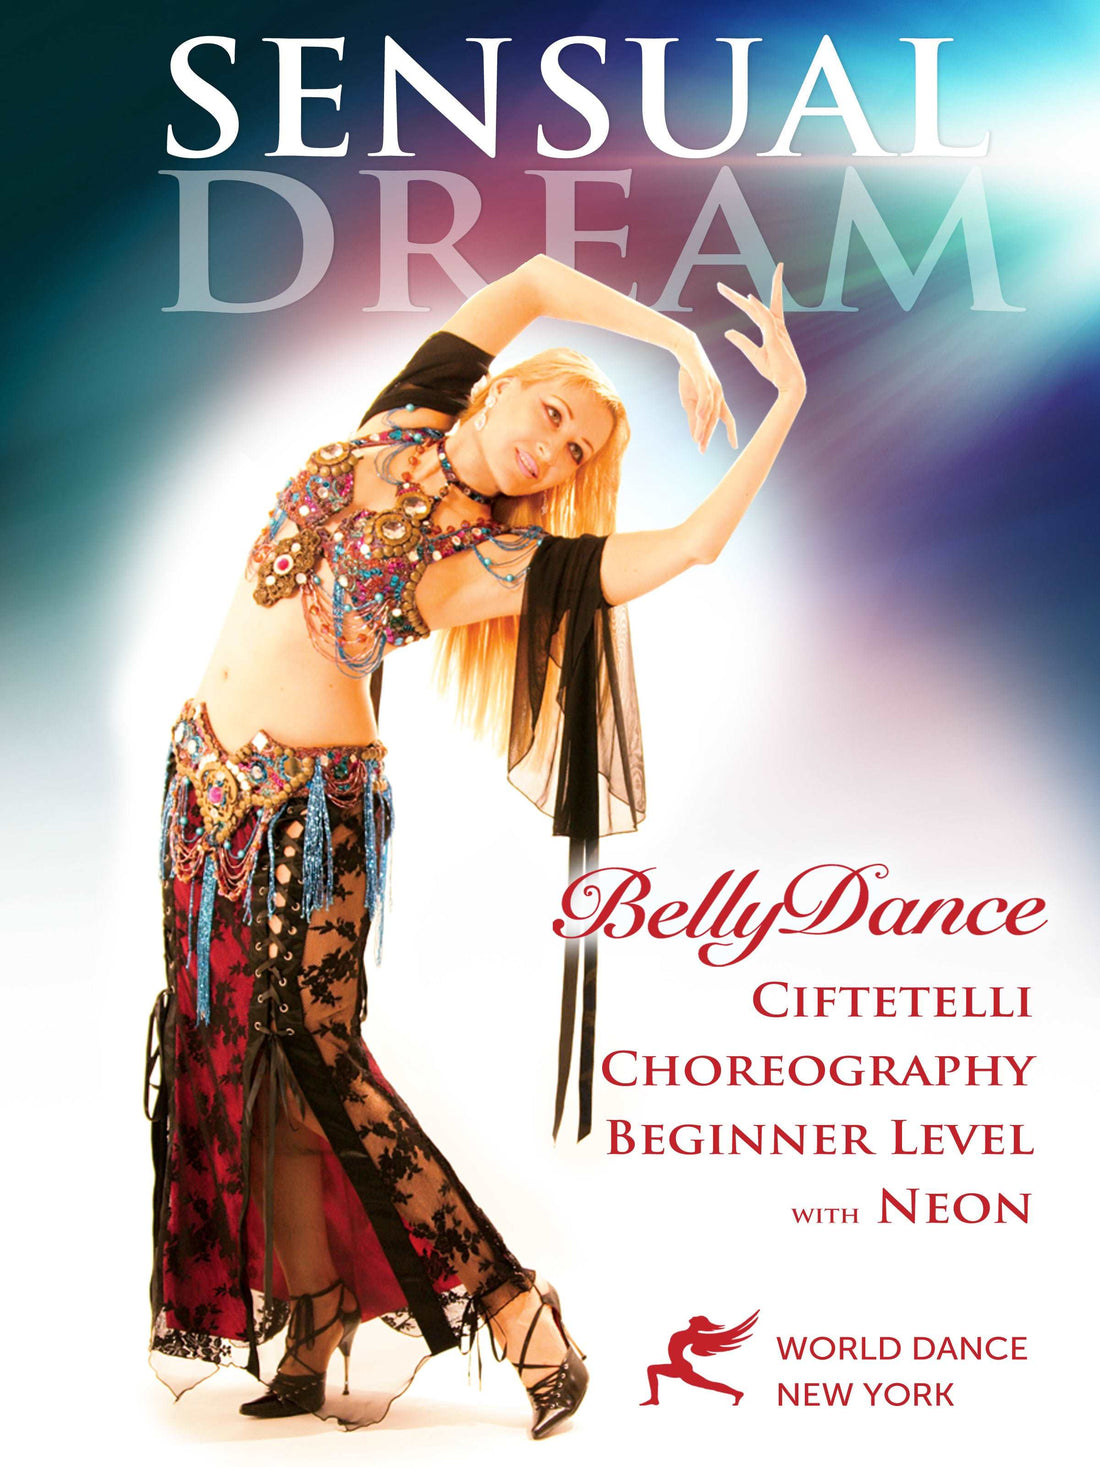 Sensual Dream: A Belly Dance Choreography by Neon, Beginner Bellydance - Instant Streaming Video - World Dance New York